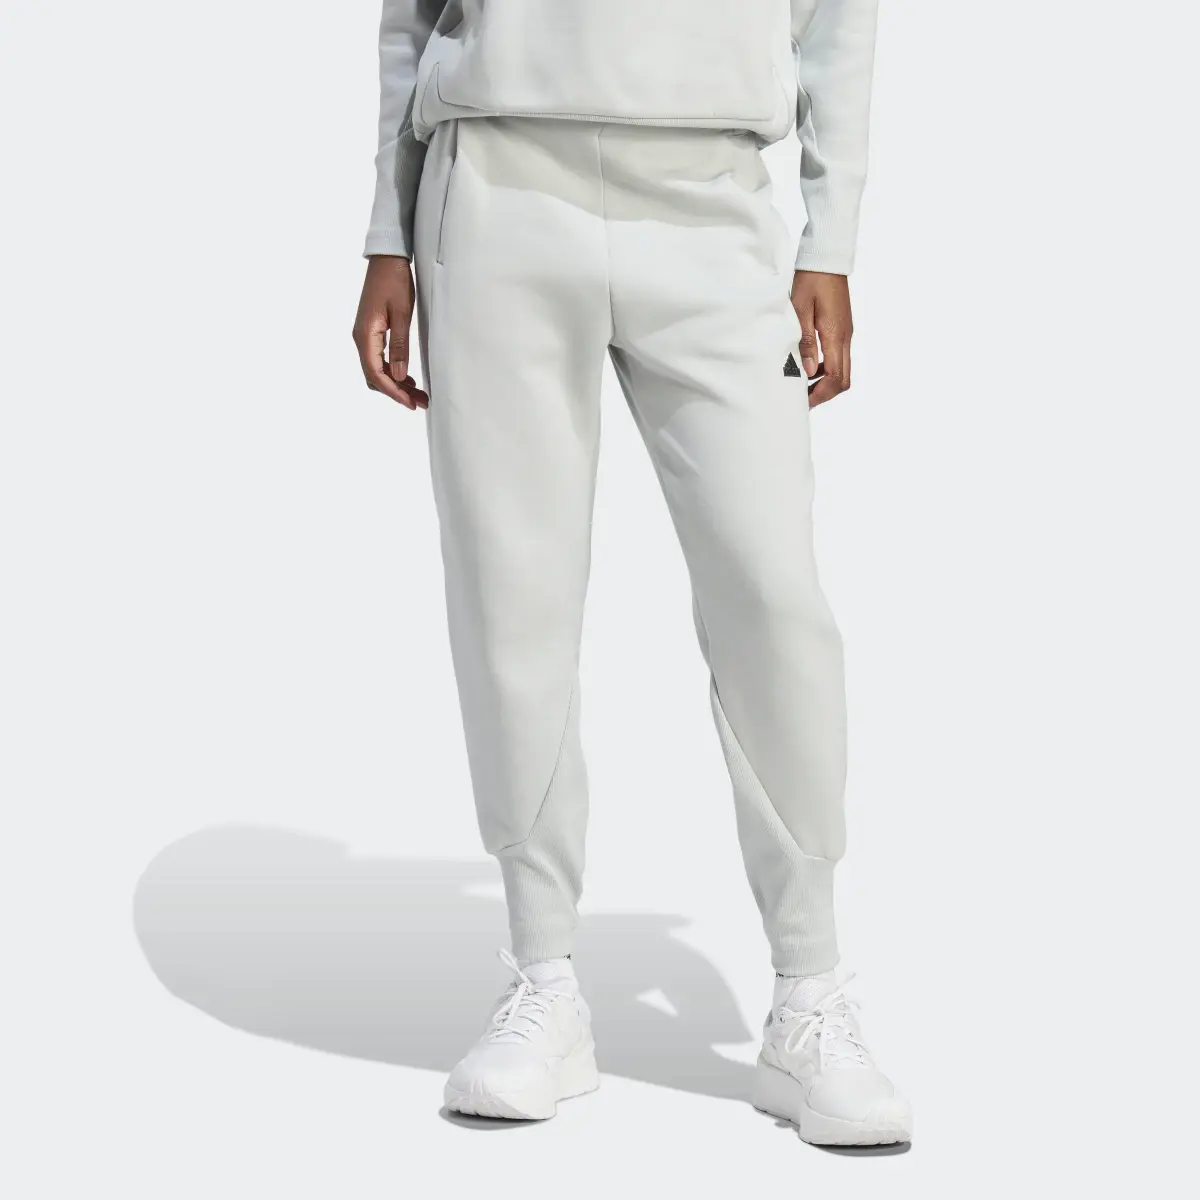 Adidas Z.N.E. Tracksuit Bottoms. 1